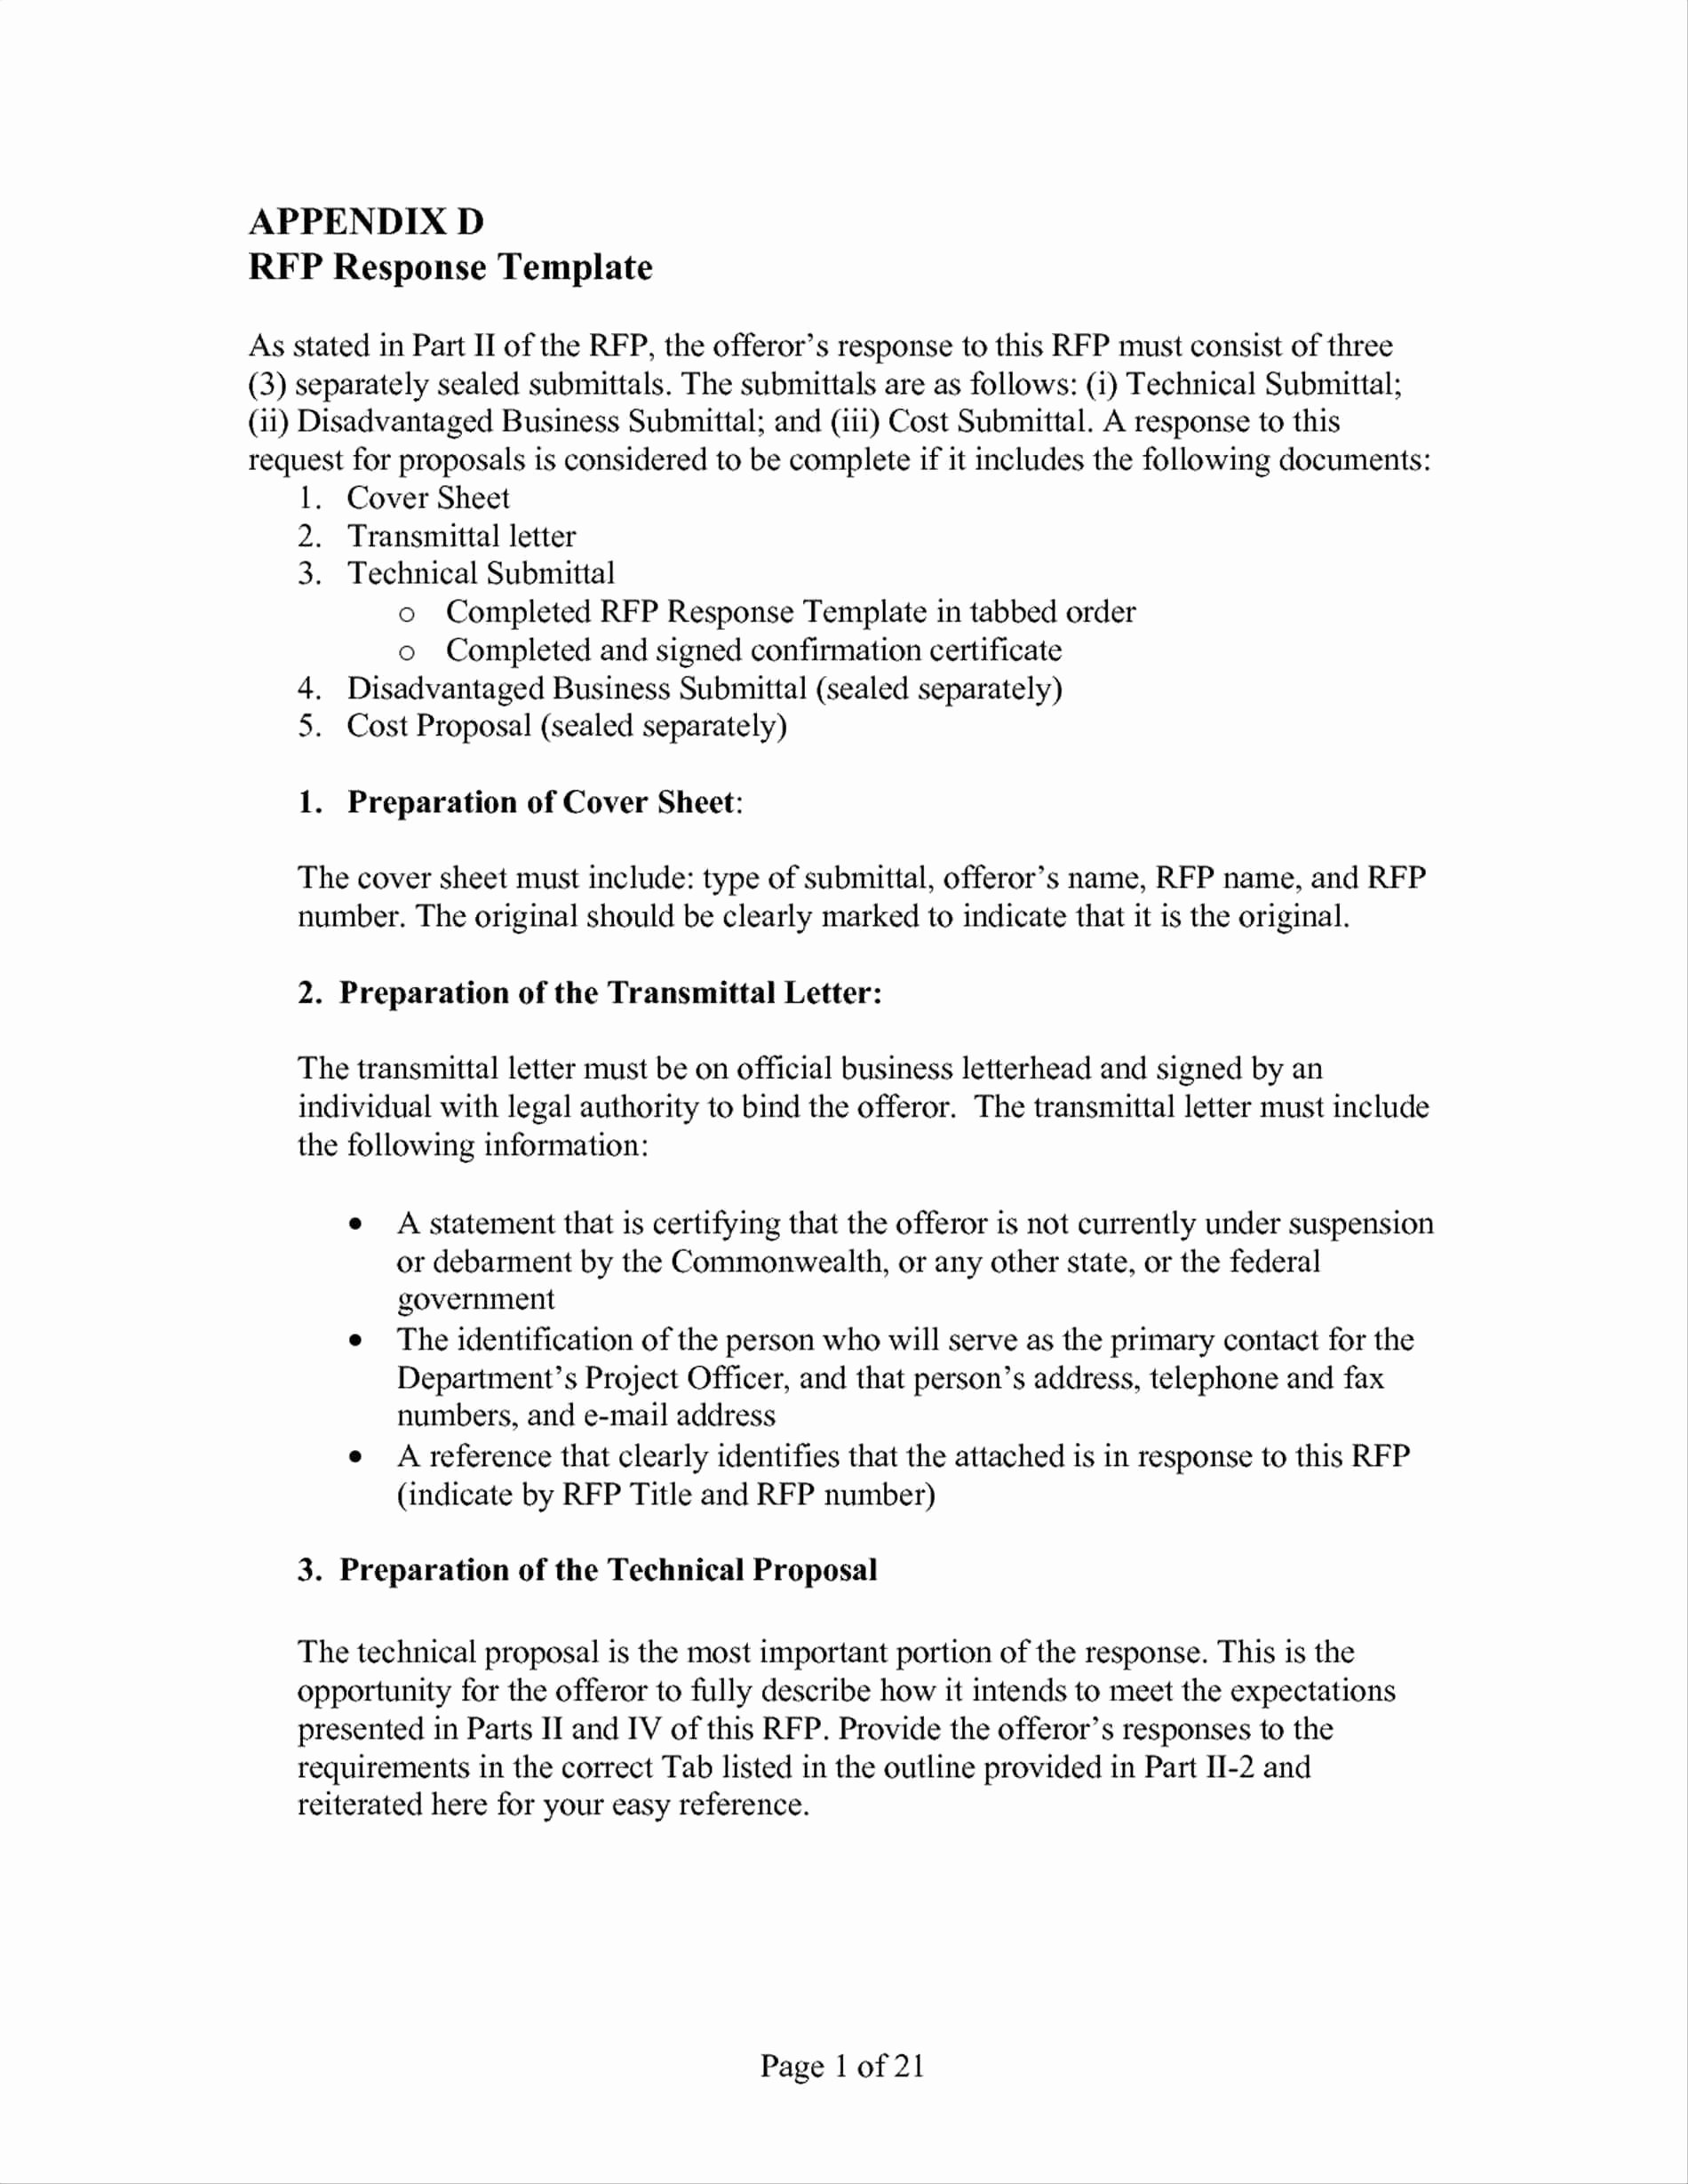 Sample Rfp Response Template Beautiful 14 15 Cover Letter for Rfp Response